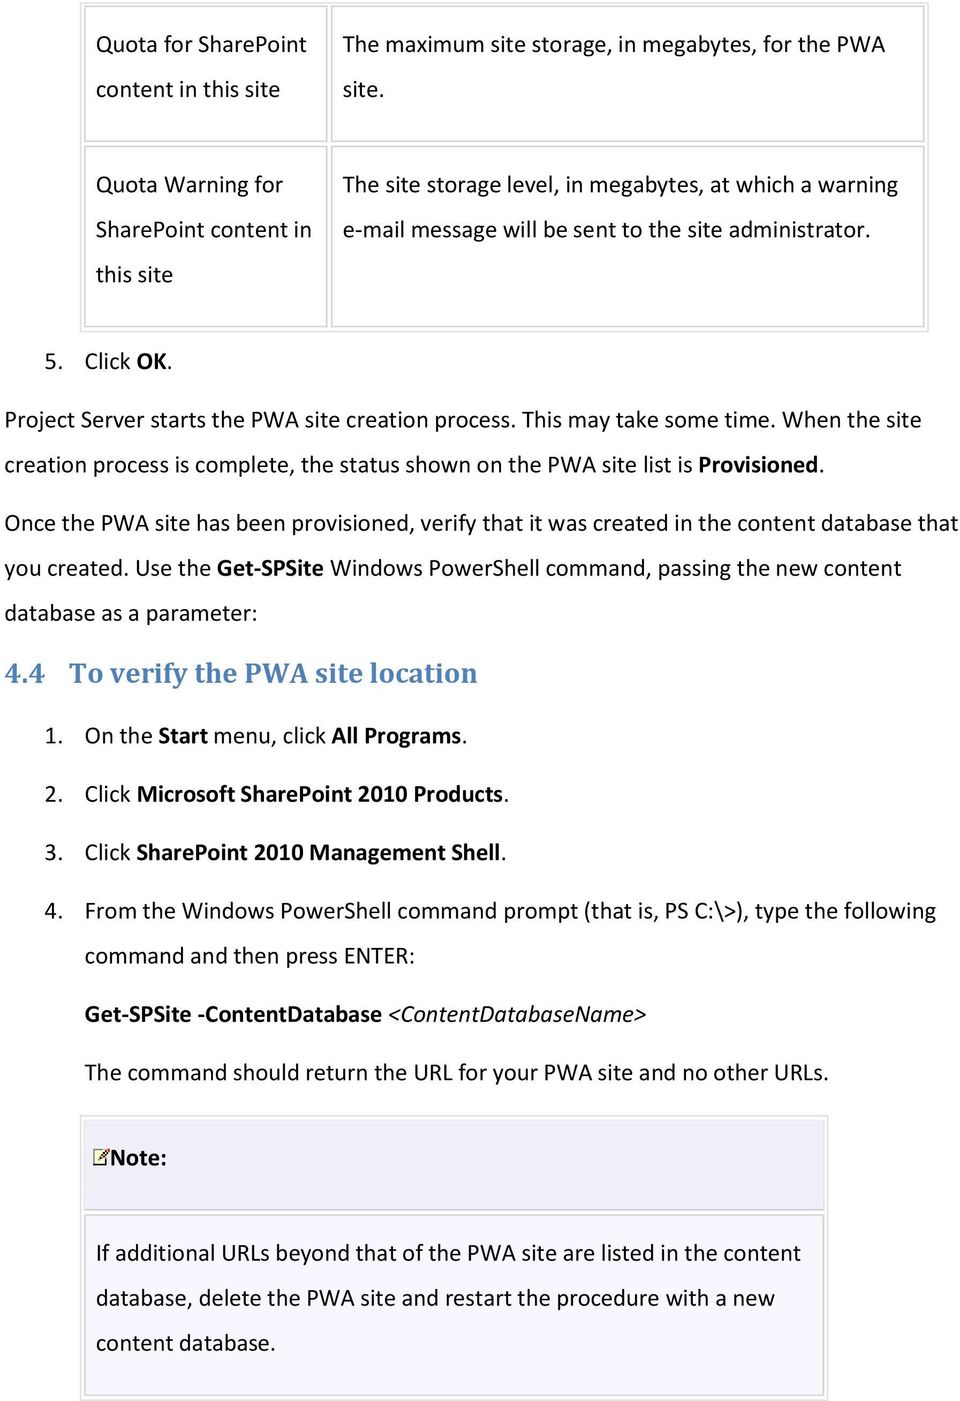 Project Server starts the PWA site creation process. This may take some time. When the site creation process is complete, the status shown on the PWA site list is Provisioned.